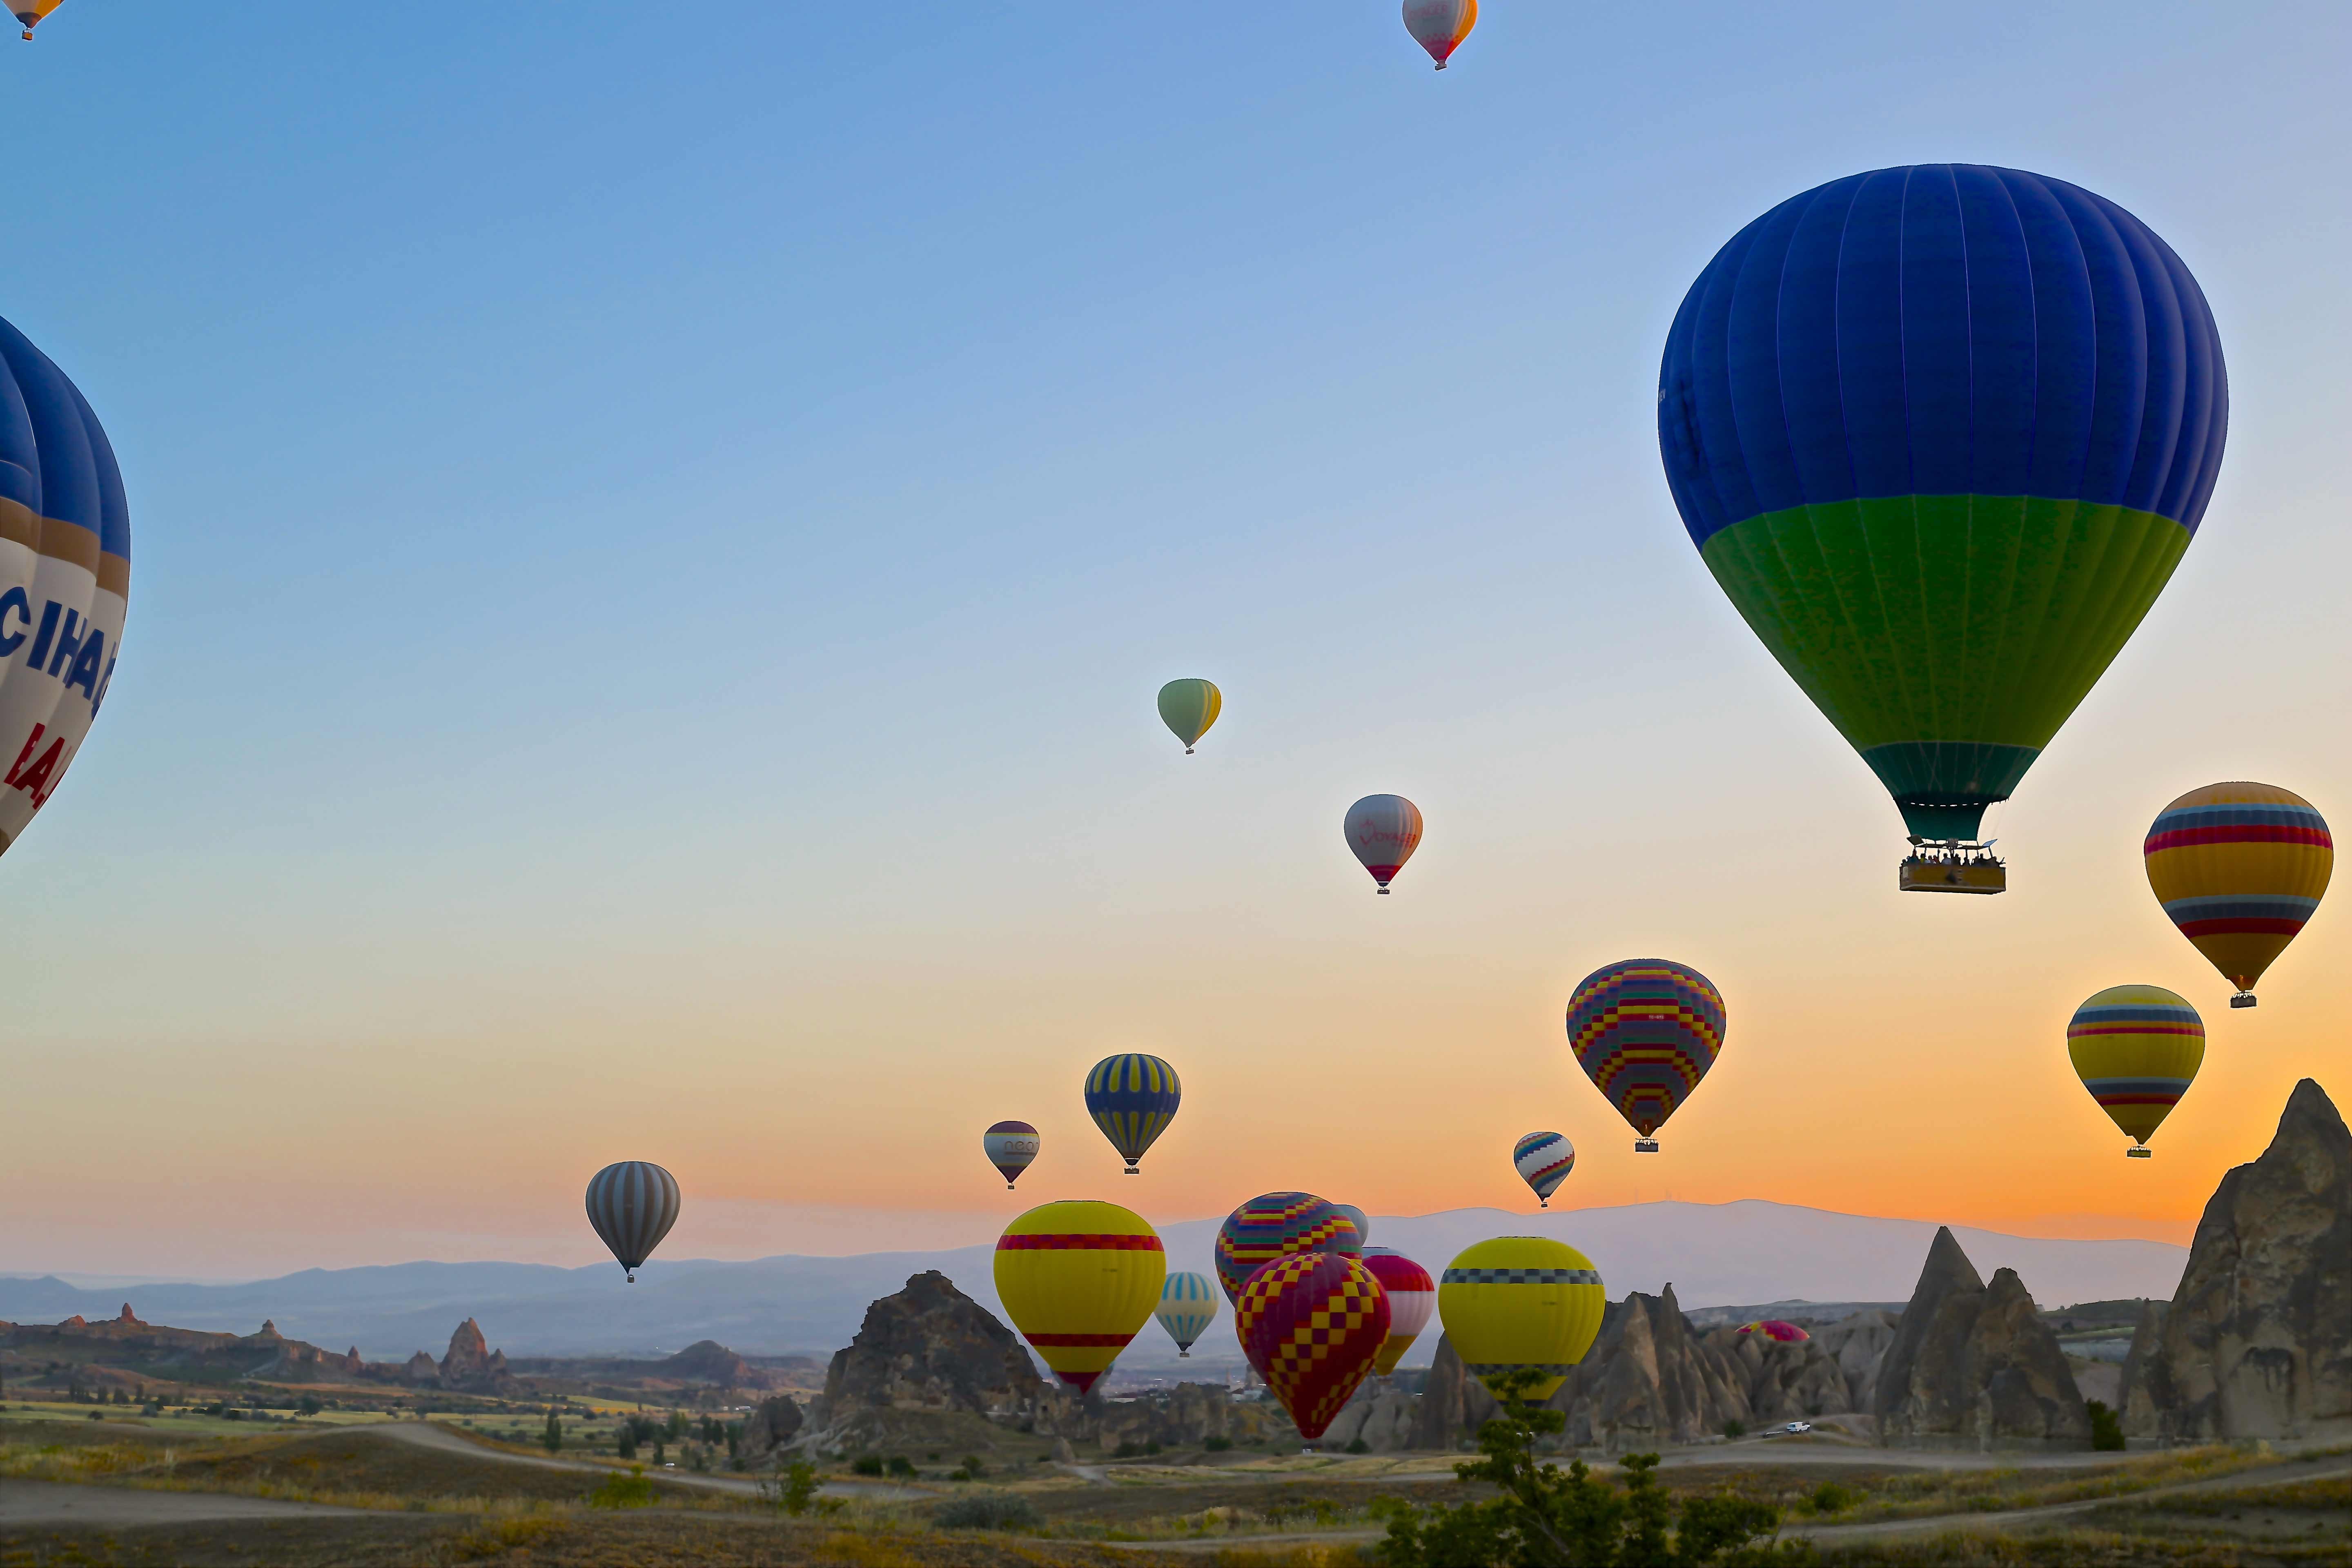 The Number of Tourists Arriving in Cappadocia Increased by 85%